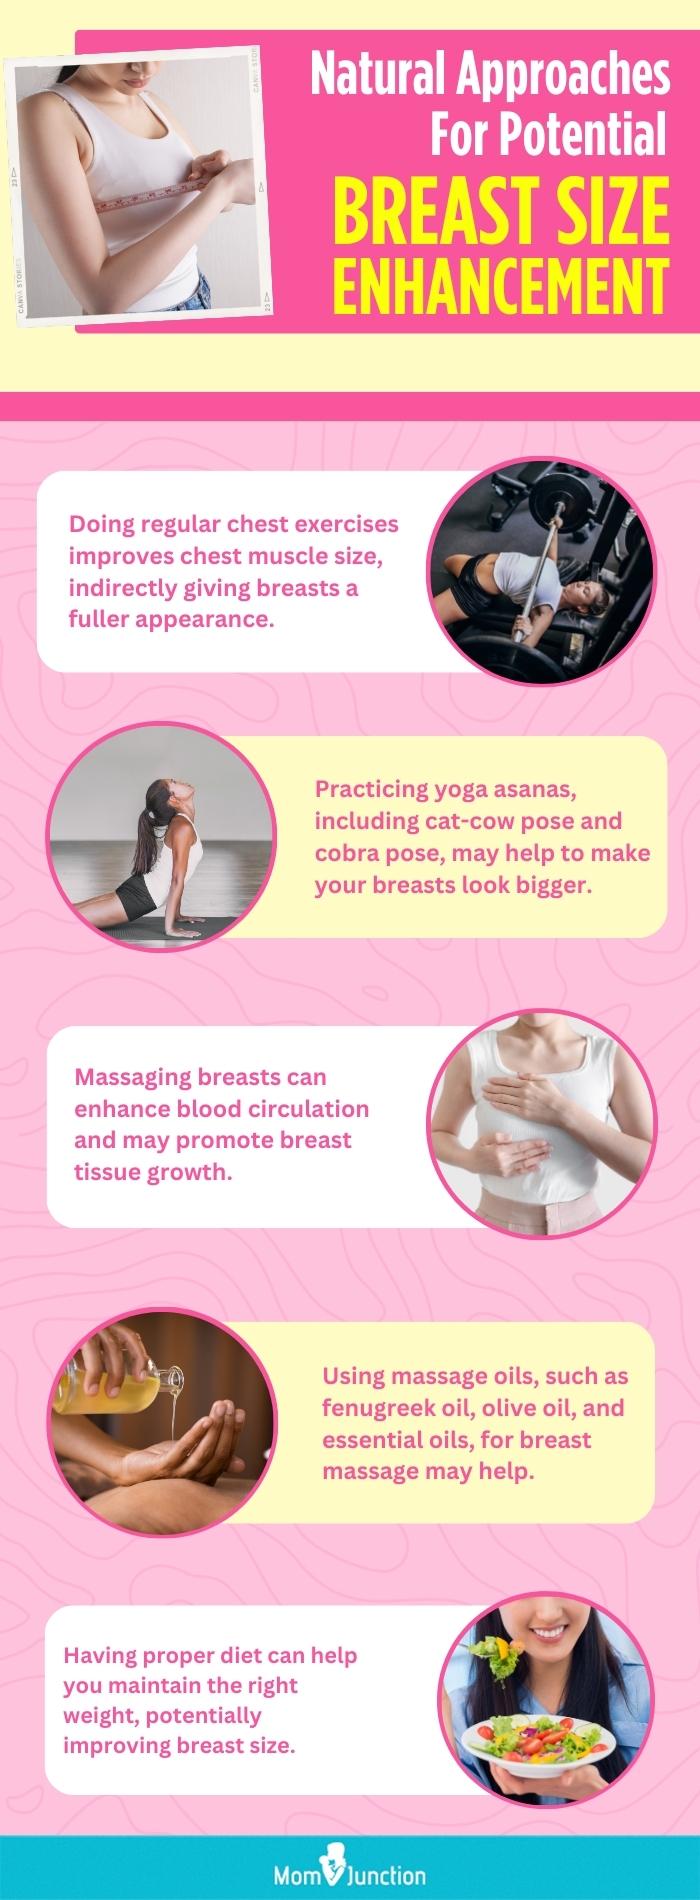 Natural Approaches For Potential Breast Size Enhancement (infographic)